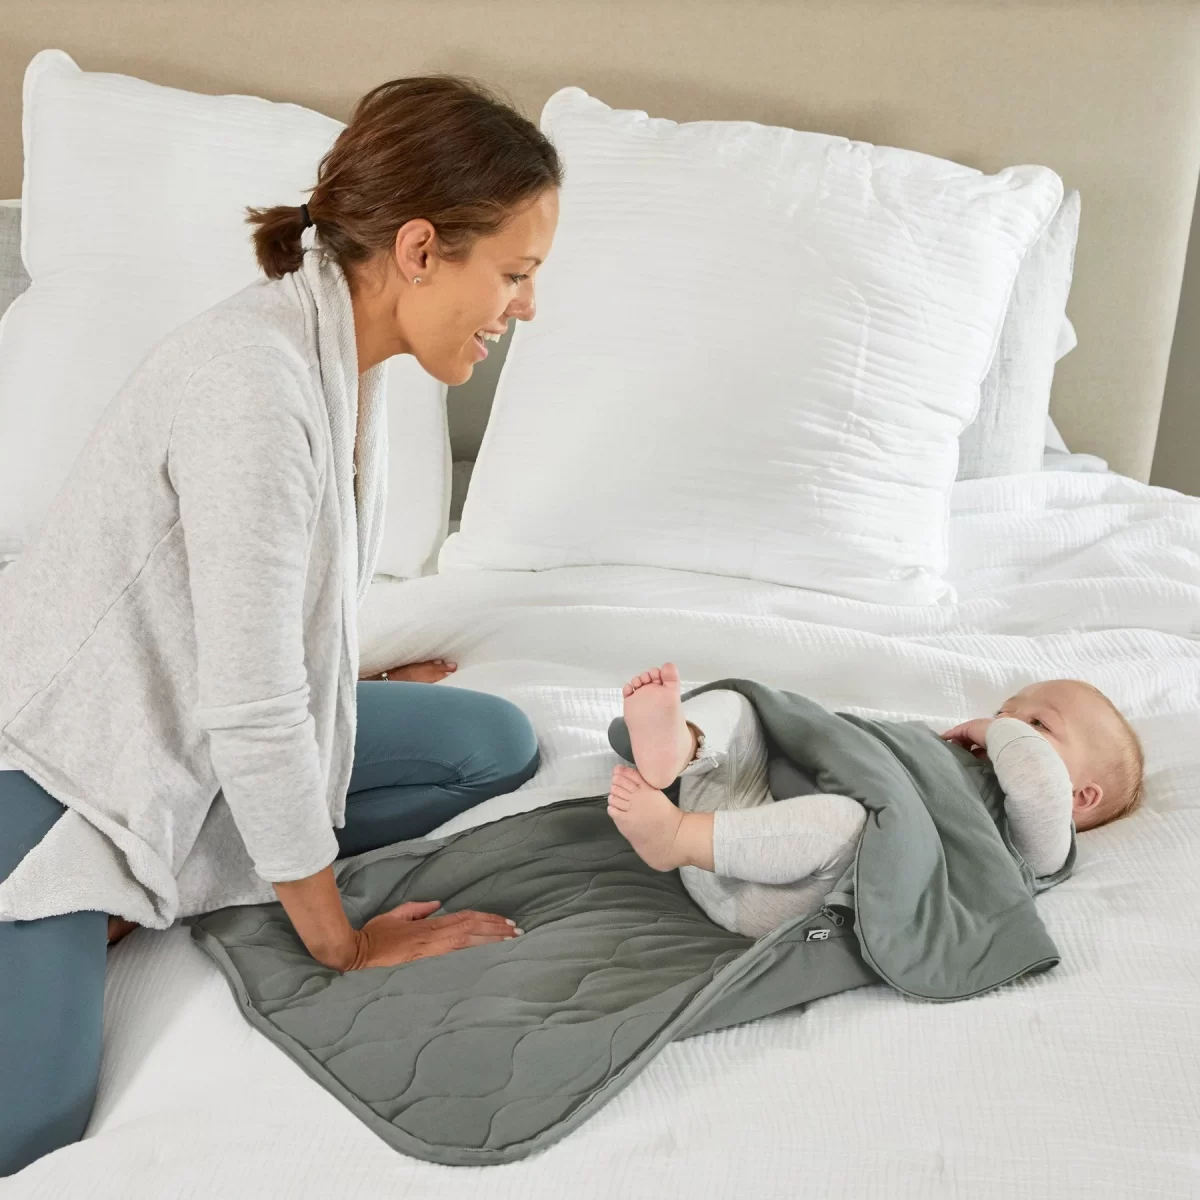 22 Of The Best Gifts For New Parents To Make Life Easier 32 Daily Mom, Magazine For Families